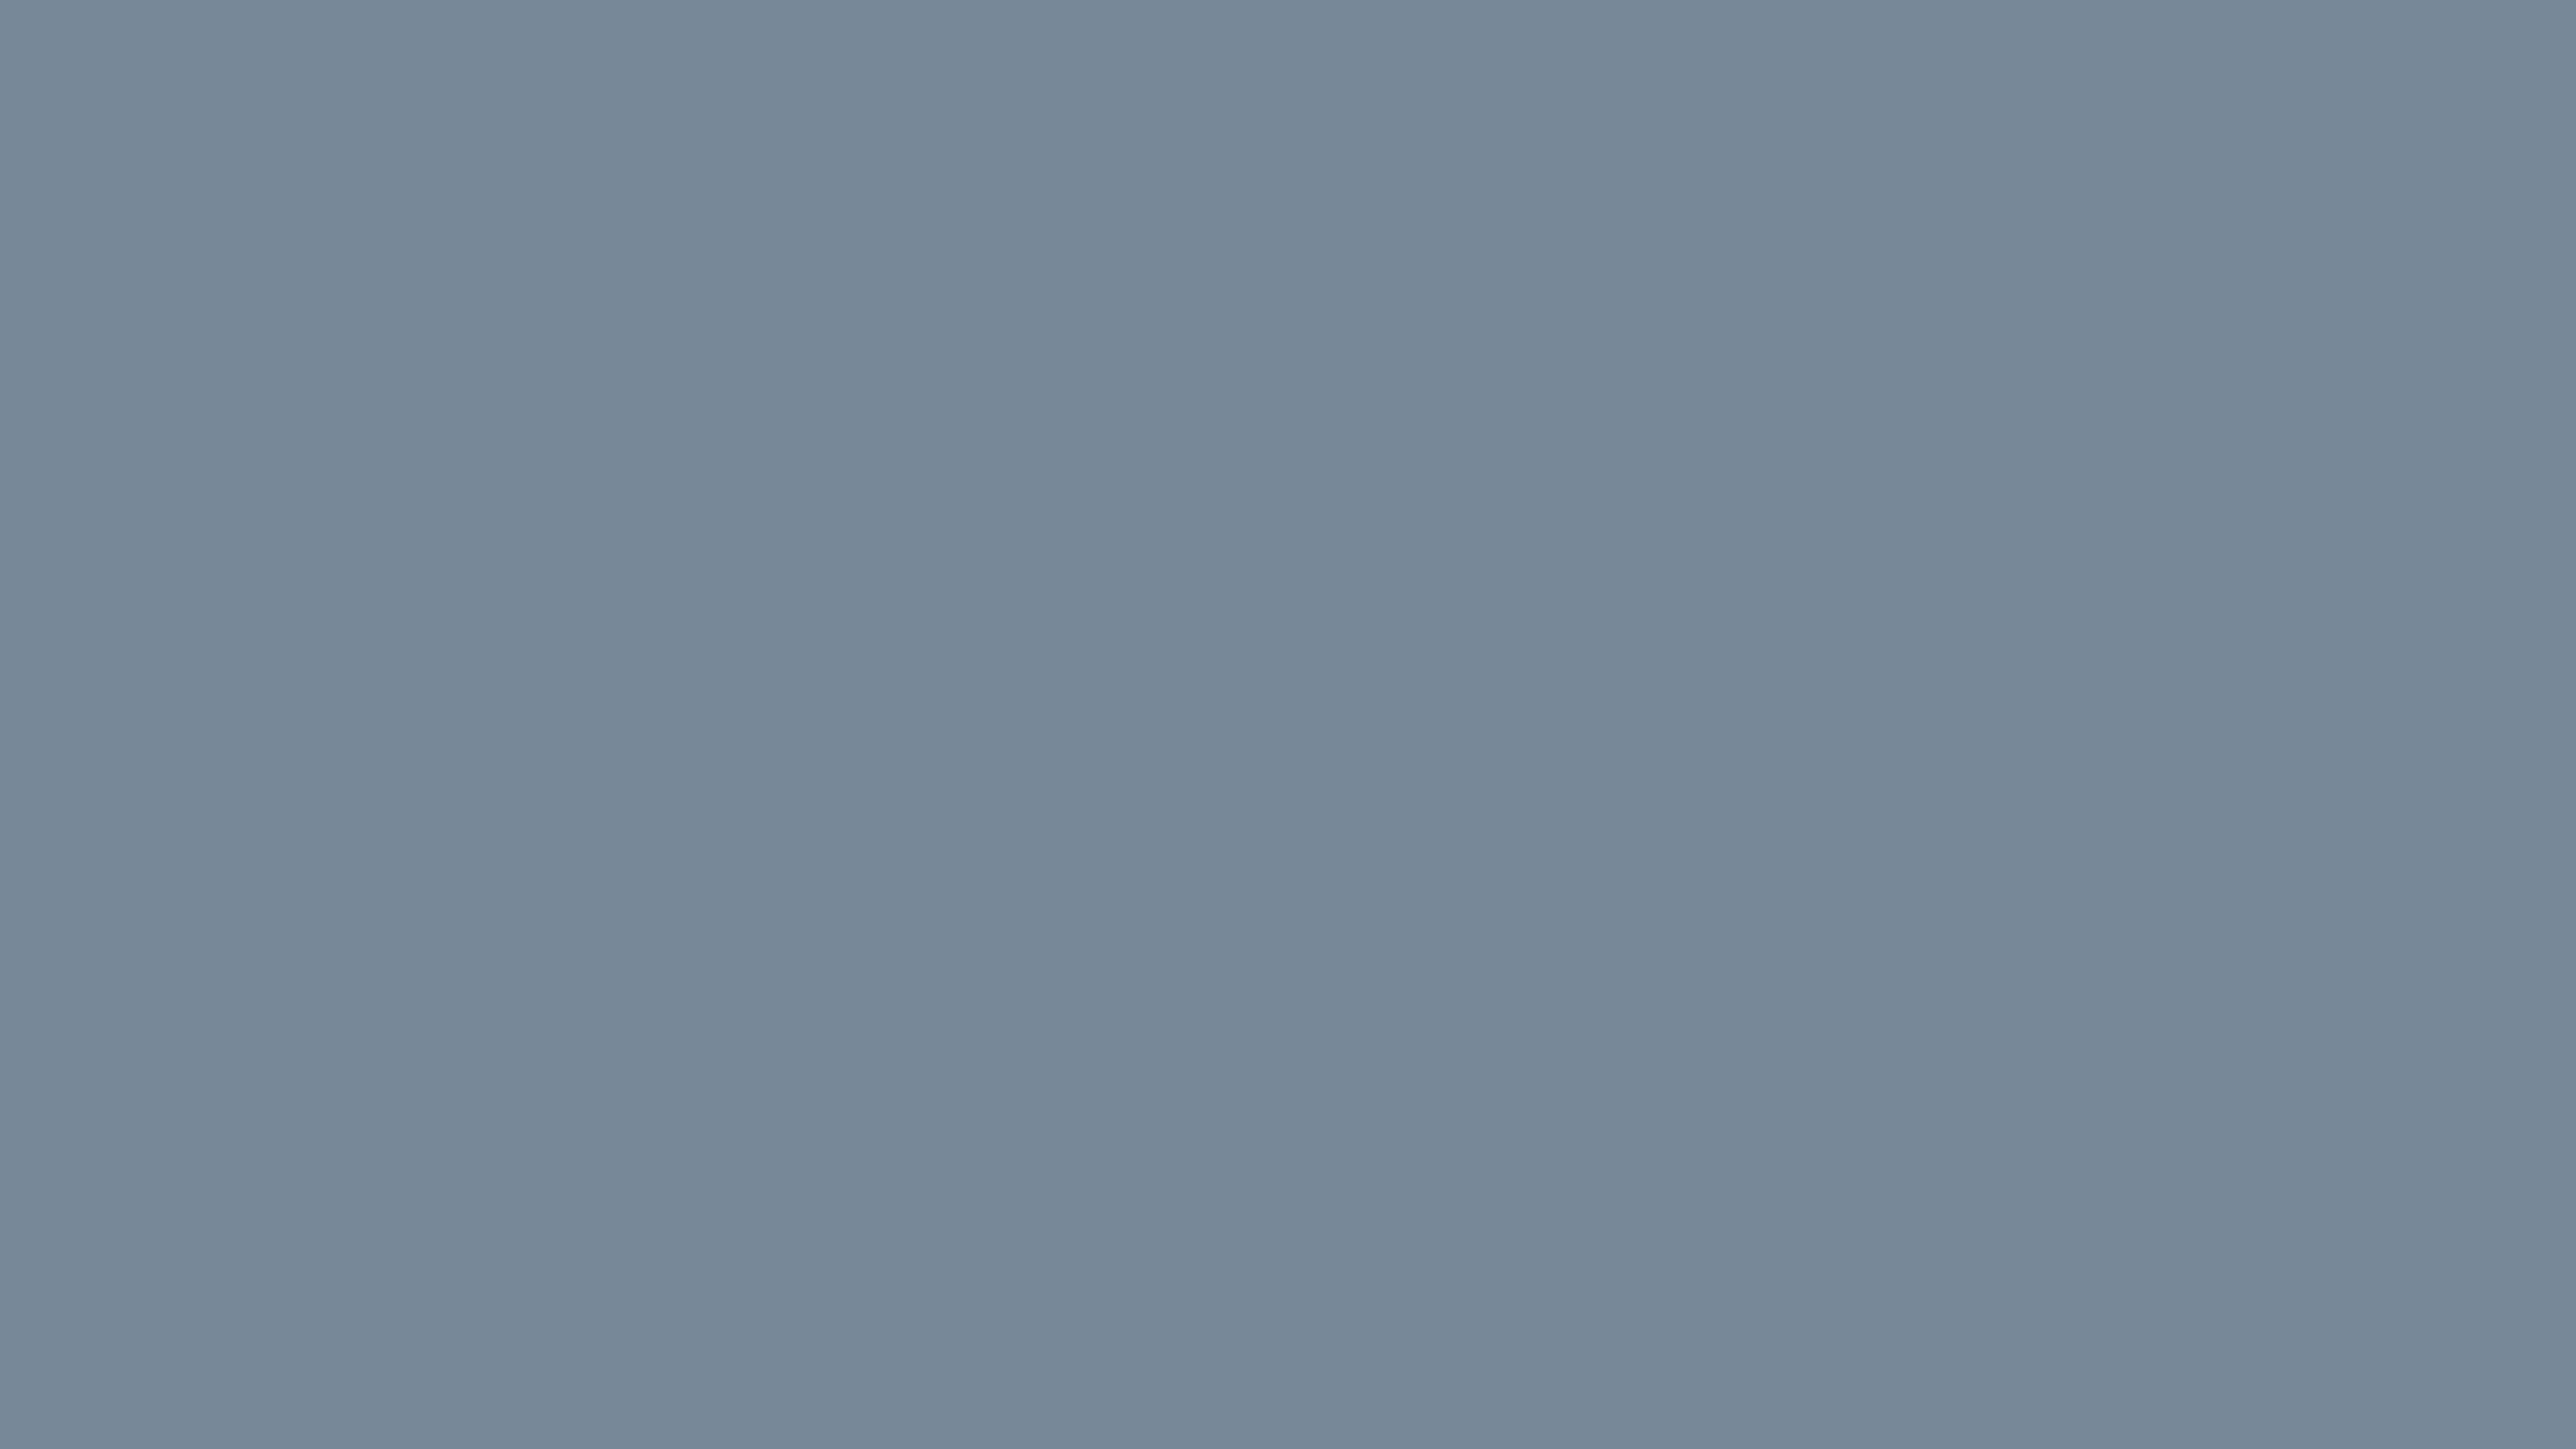 Light Slate Gray Solid Color Background Wallpaper 5120x2880 